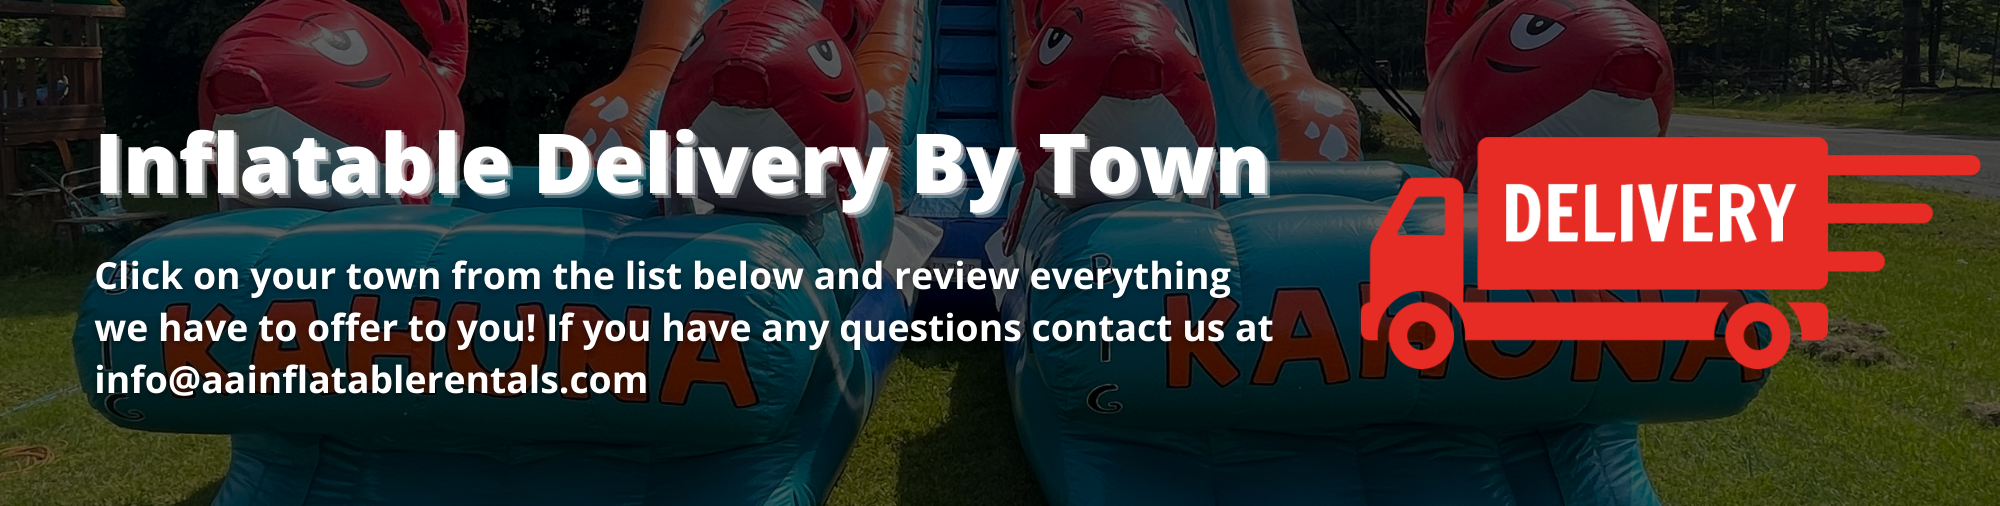 Click on your town from the list below and review everything we have to offer you!